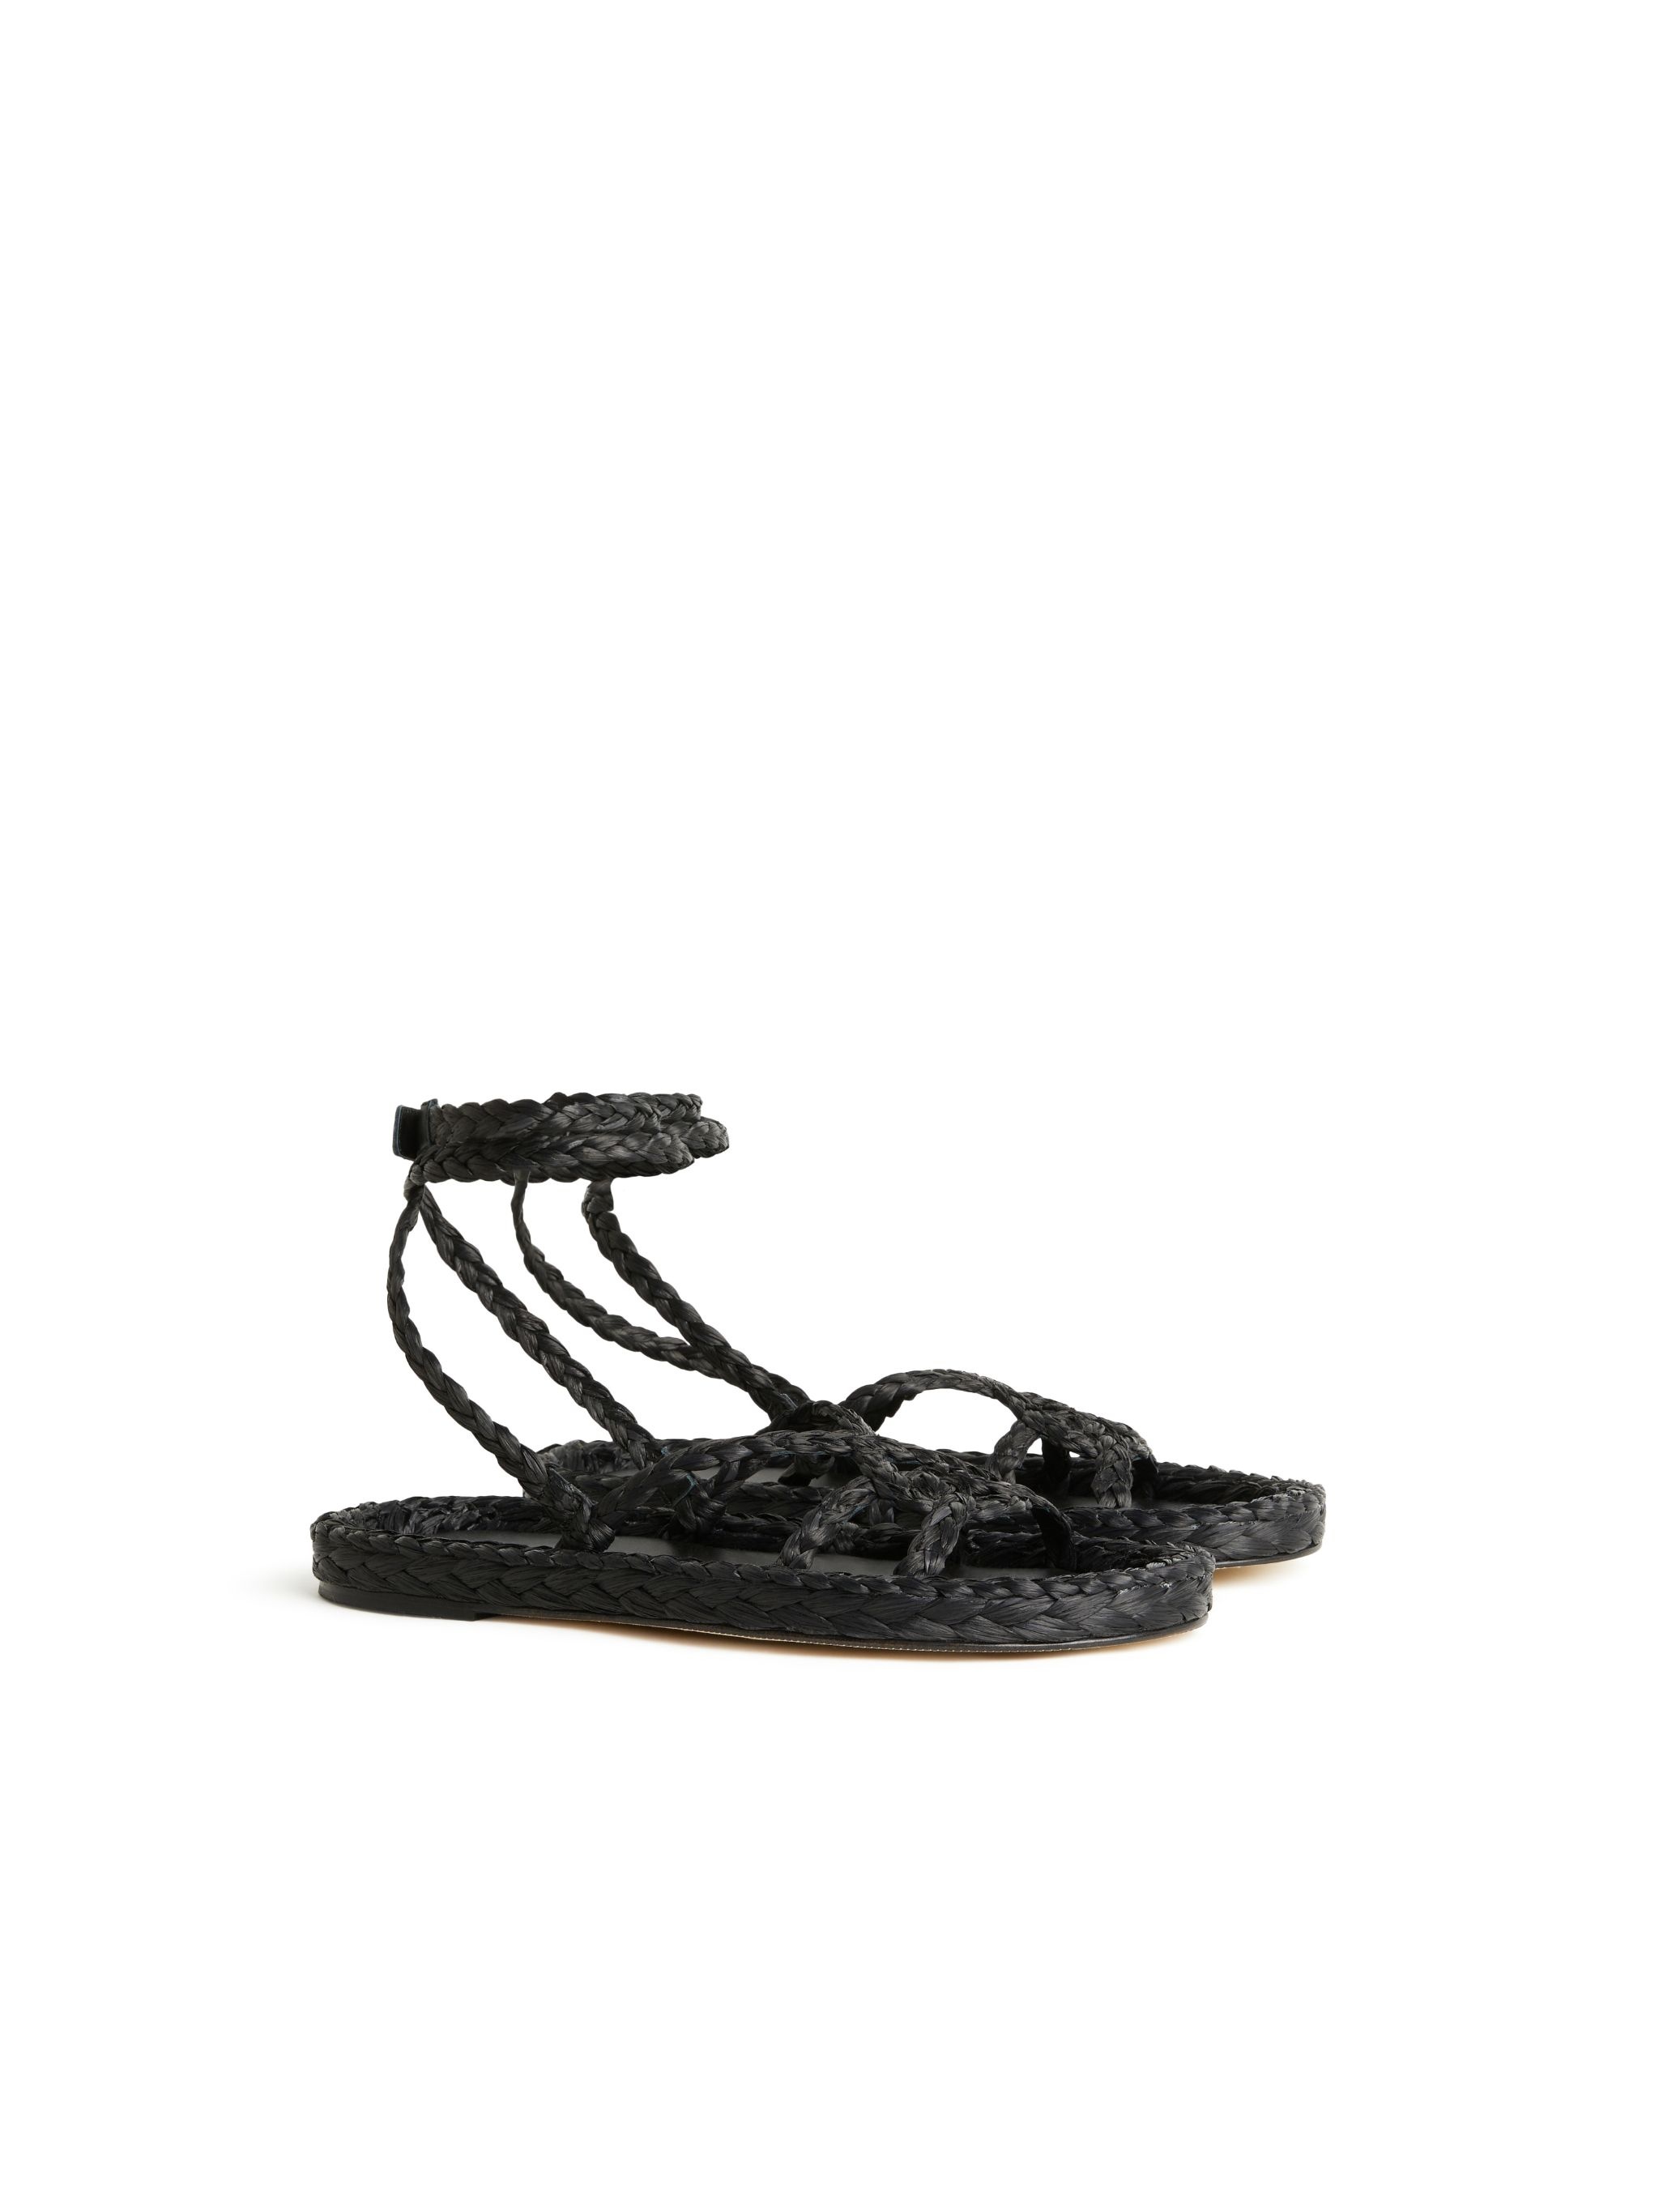 A Love Letter To India Sandals - 1